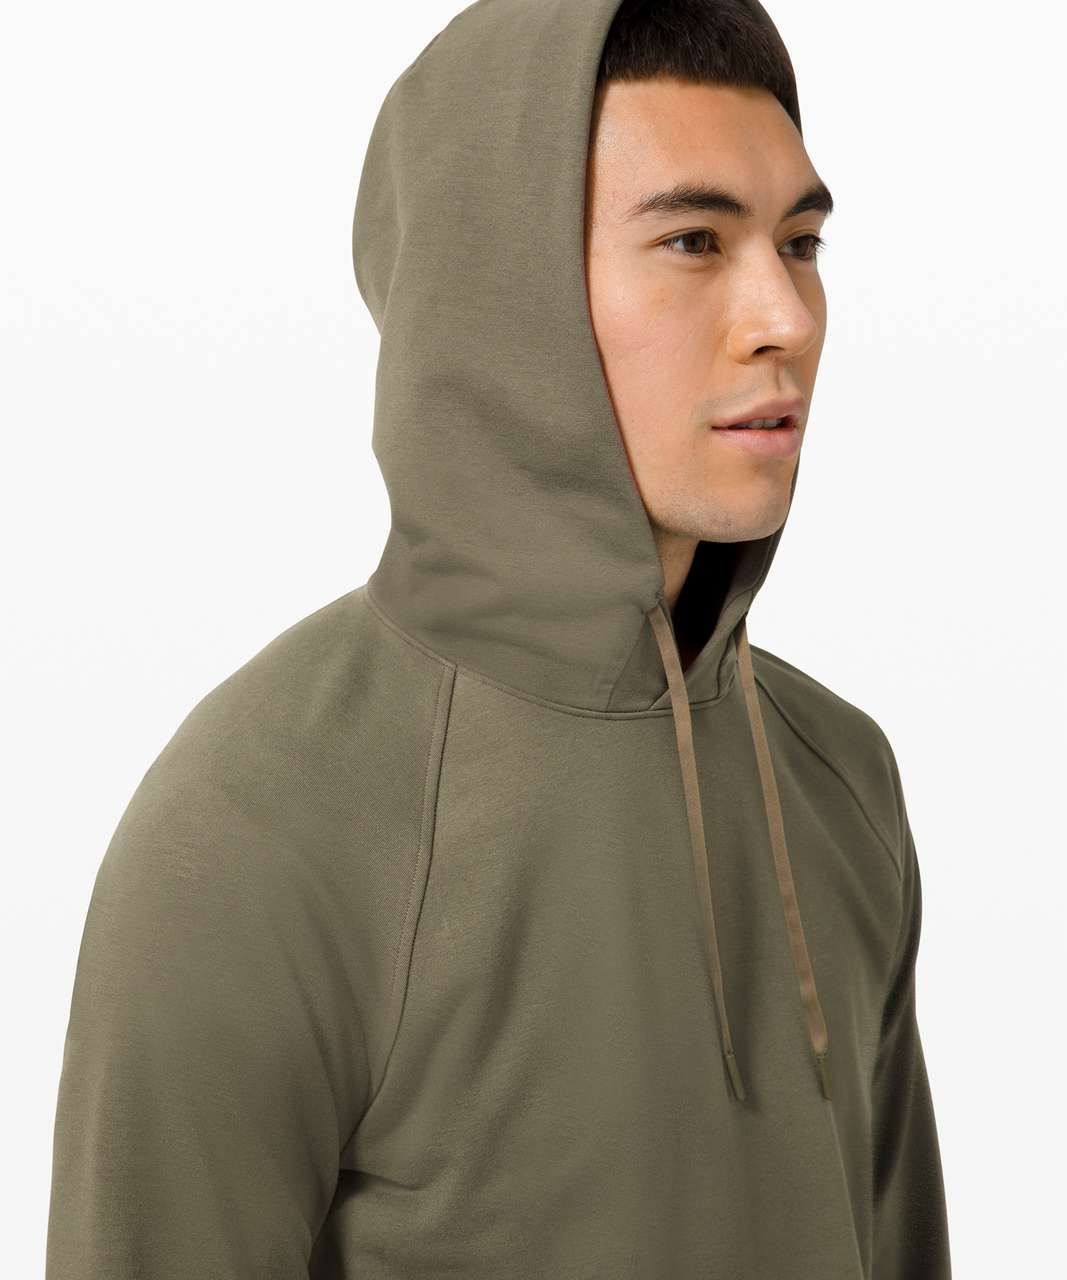 Lululemon City Sweat Pullover Hoodie French Terry - Medium Olive